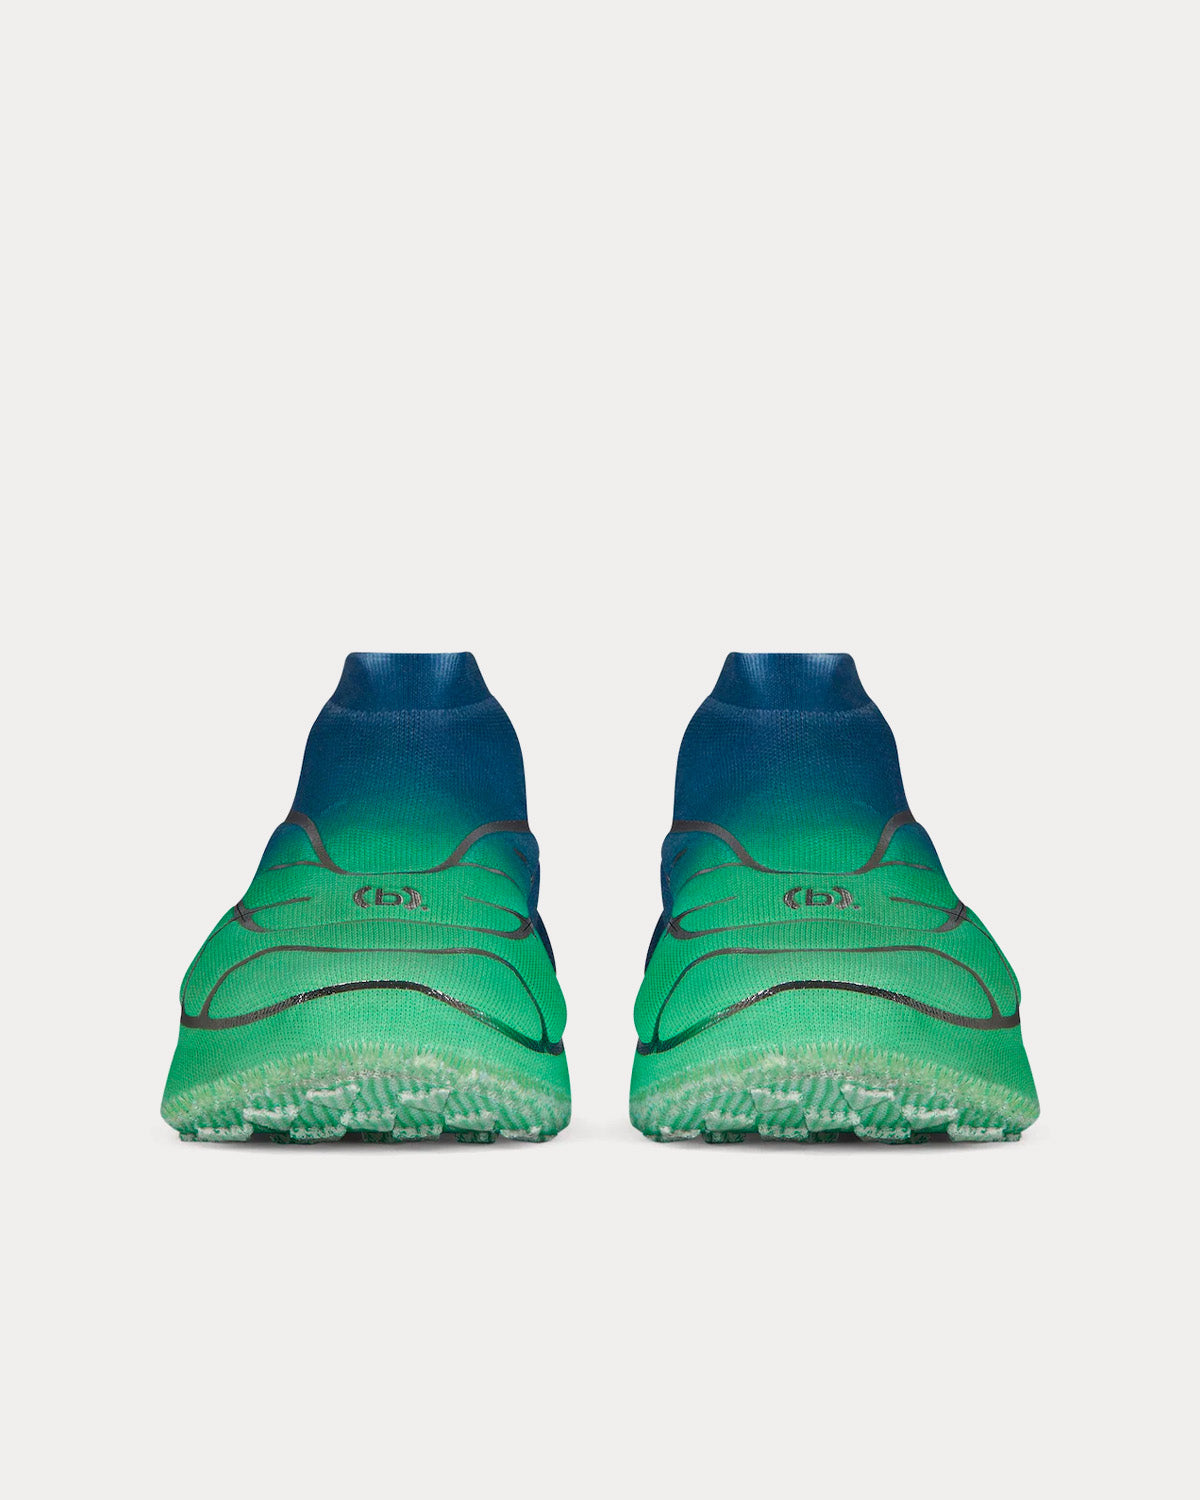 Givenchy x BSTROY - TK-360+ Mid Mesh Blue / Green Slip On Sneakers